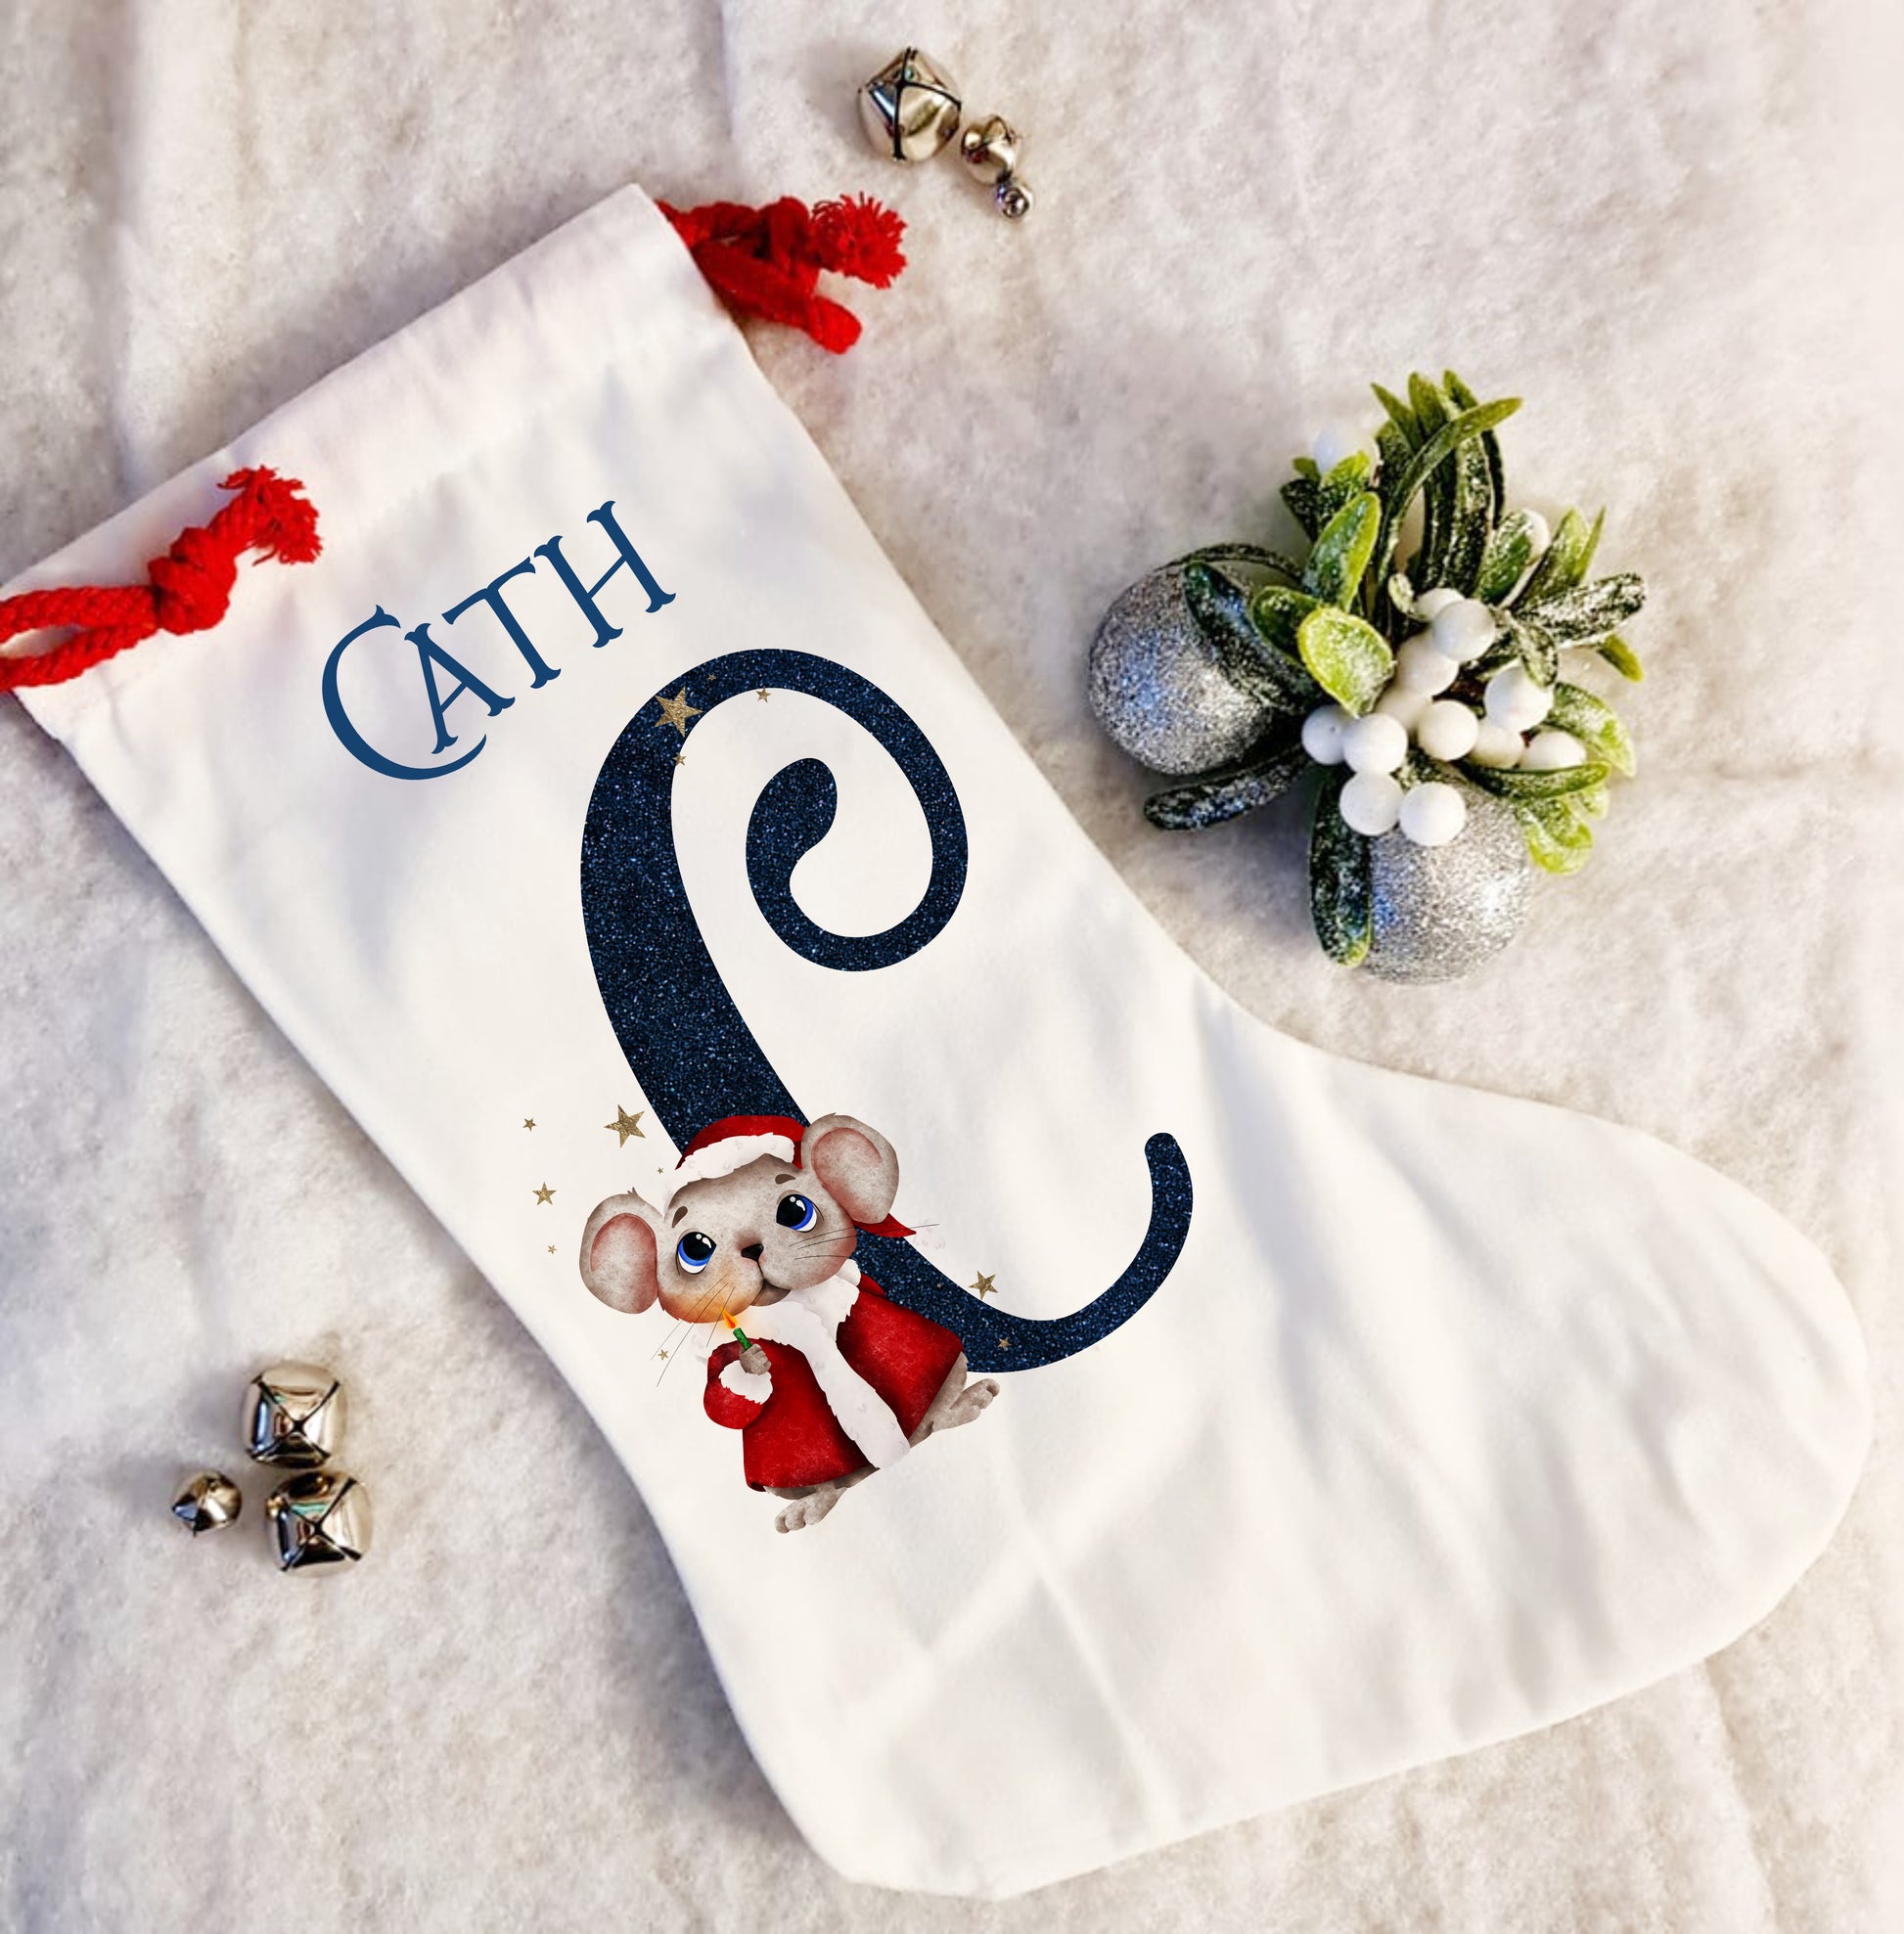 Personalised white Christmas stocking with a red rope tie and a Christmas mouse alphabet in red and navy